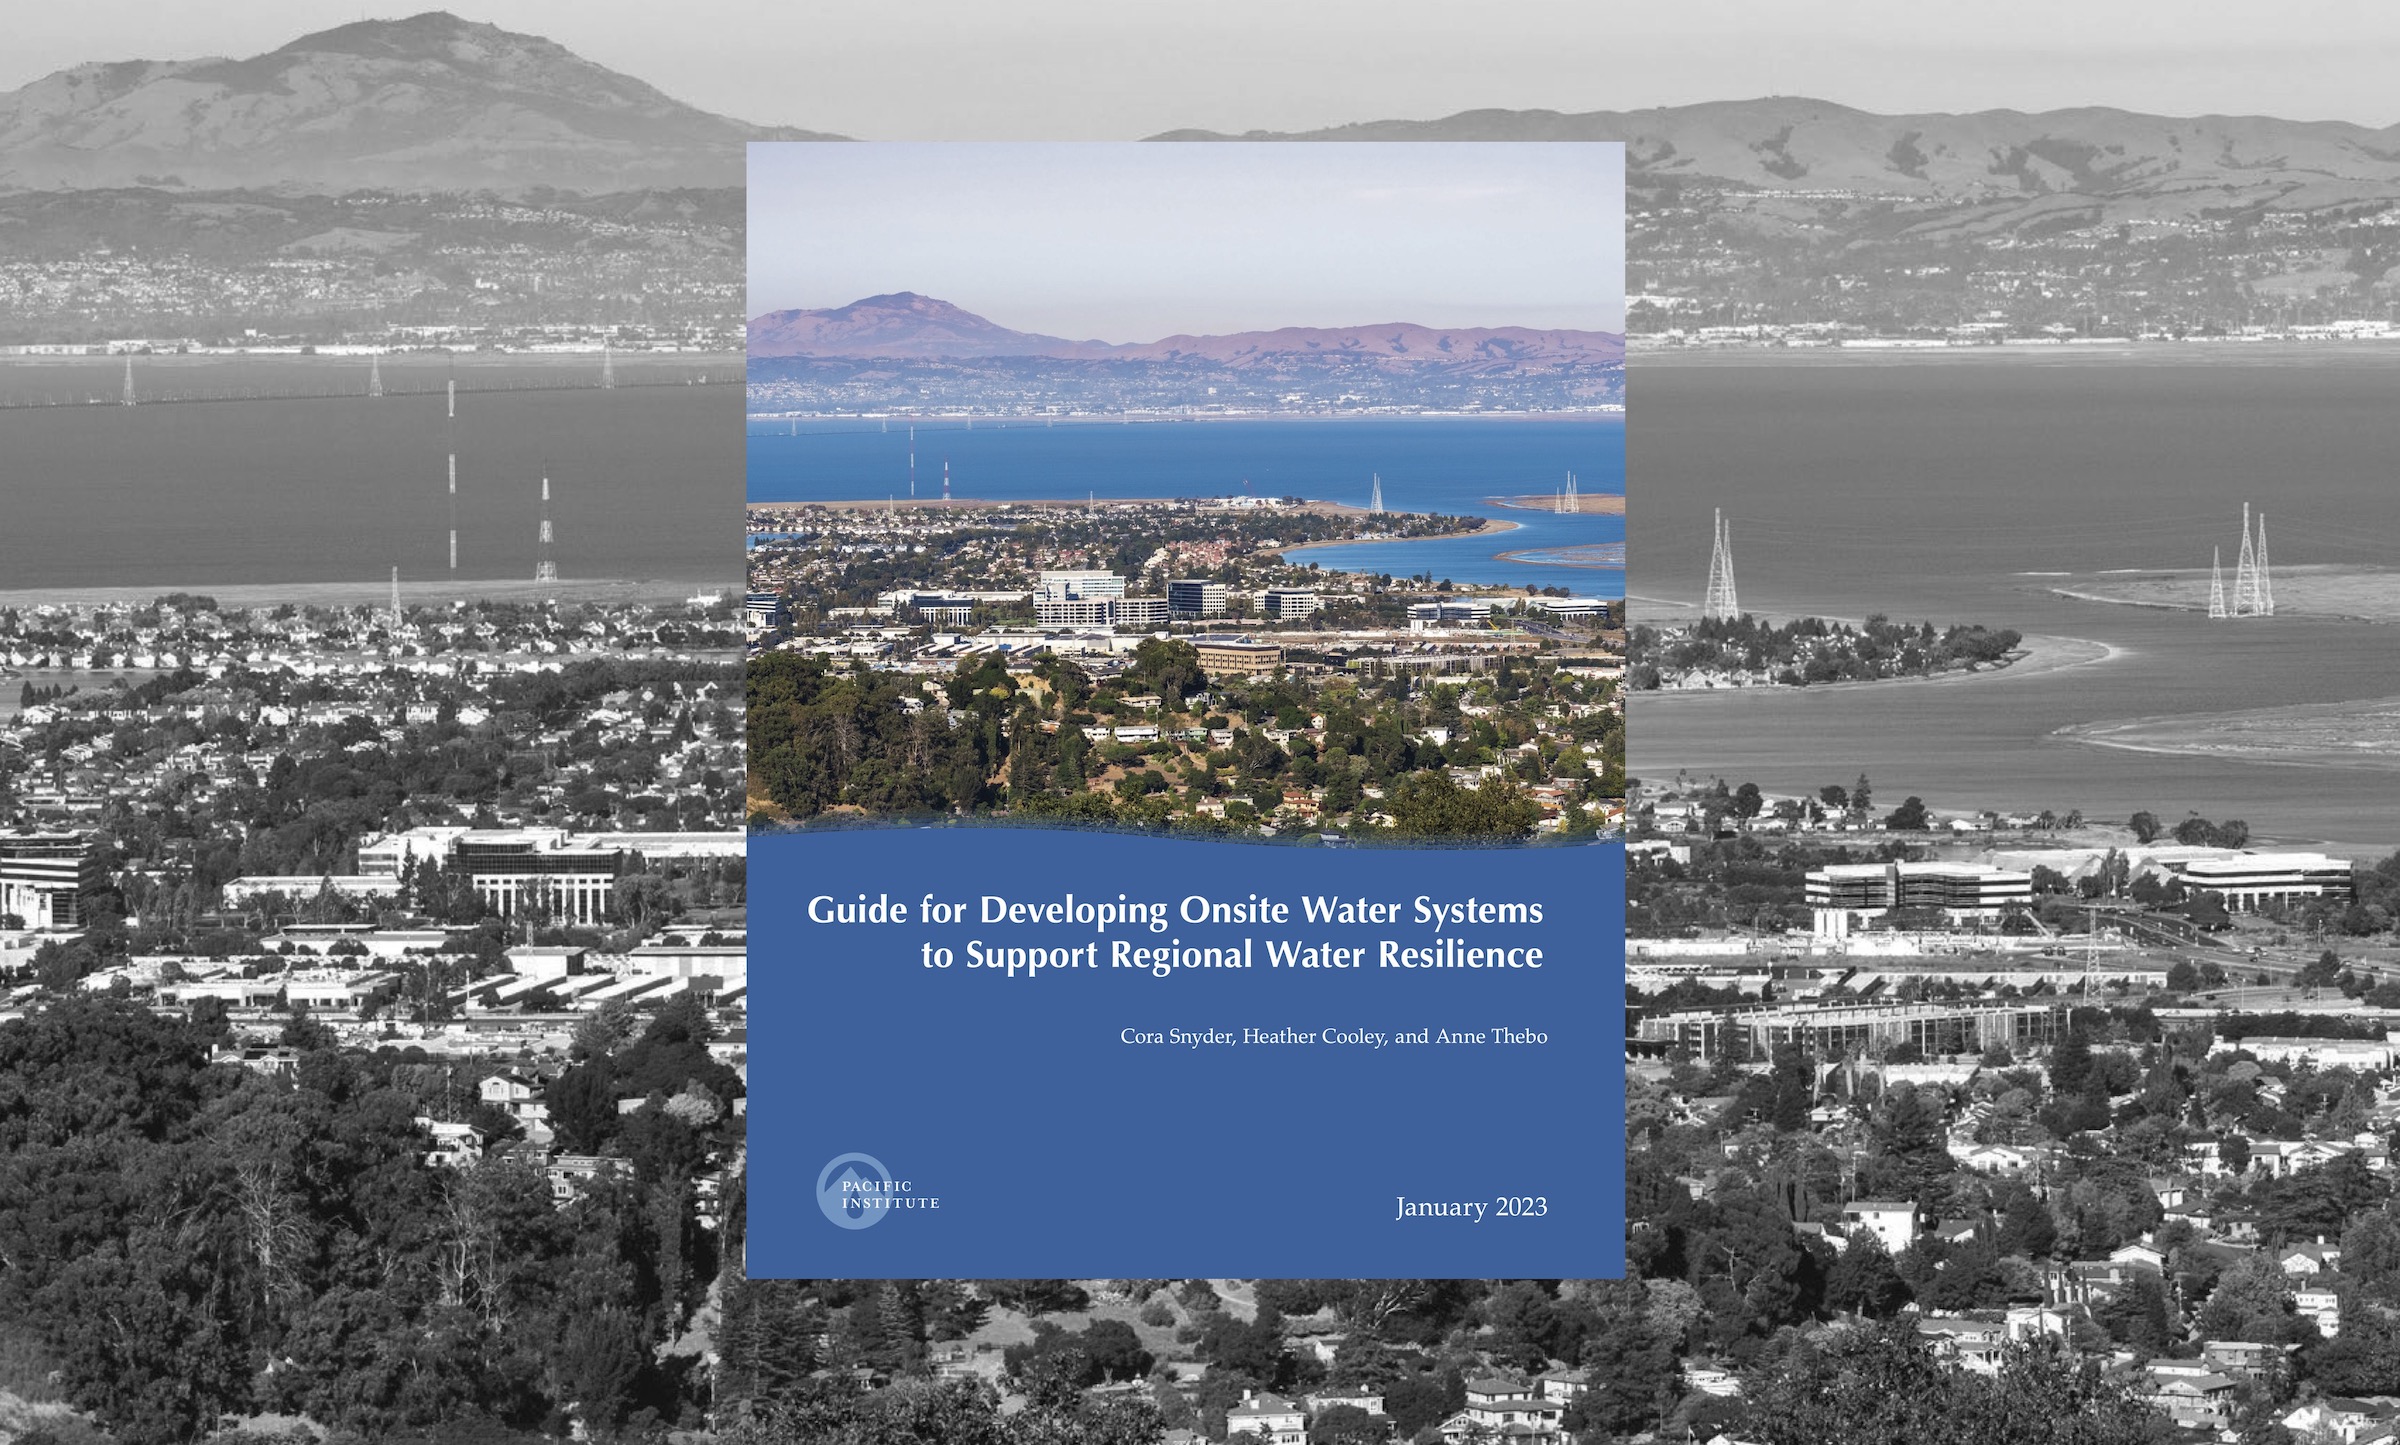 The Guide for Developing Onsite Water Systems to Support Regional Water Resilience Pacific Institute